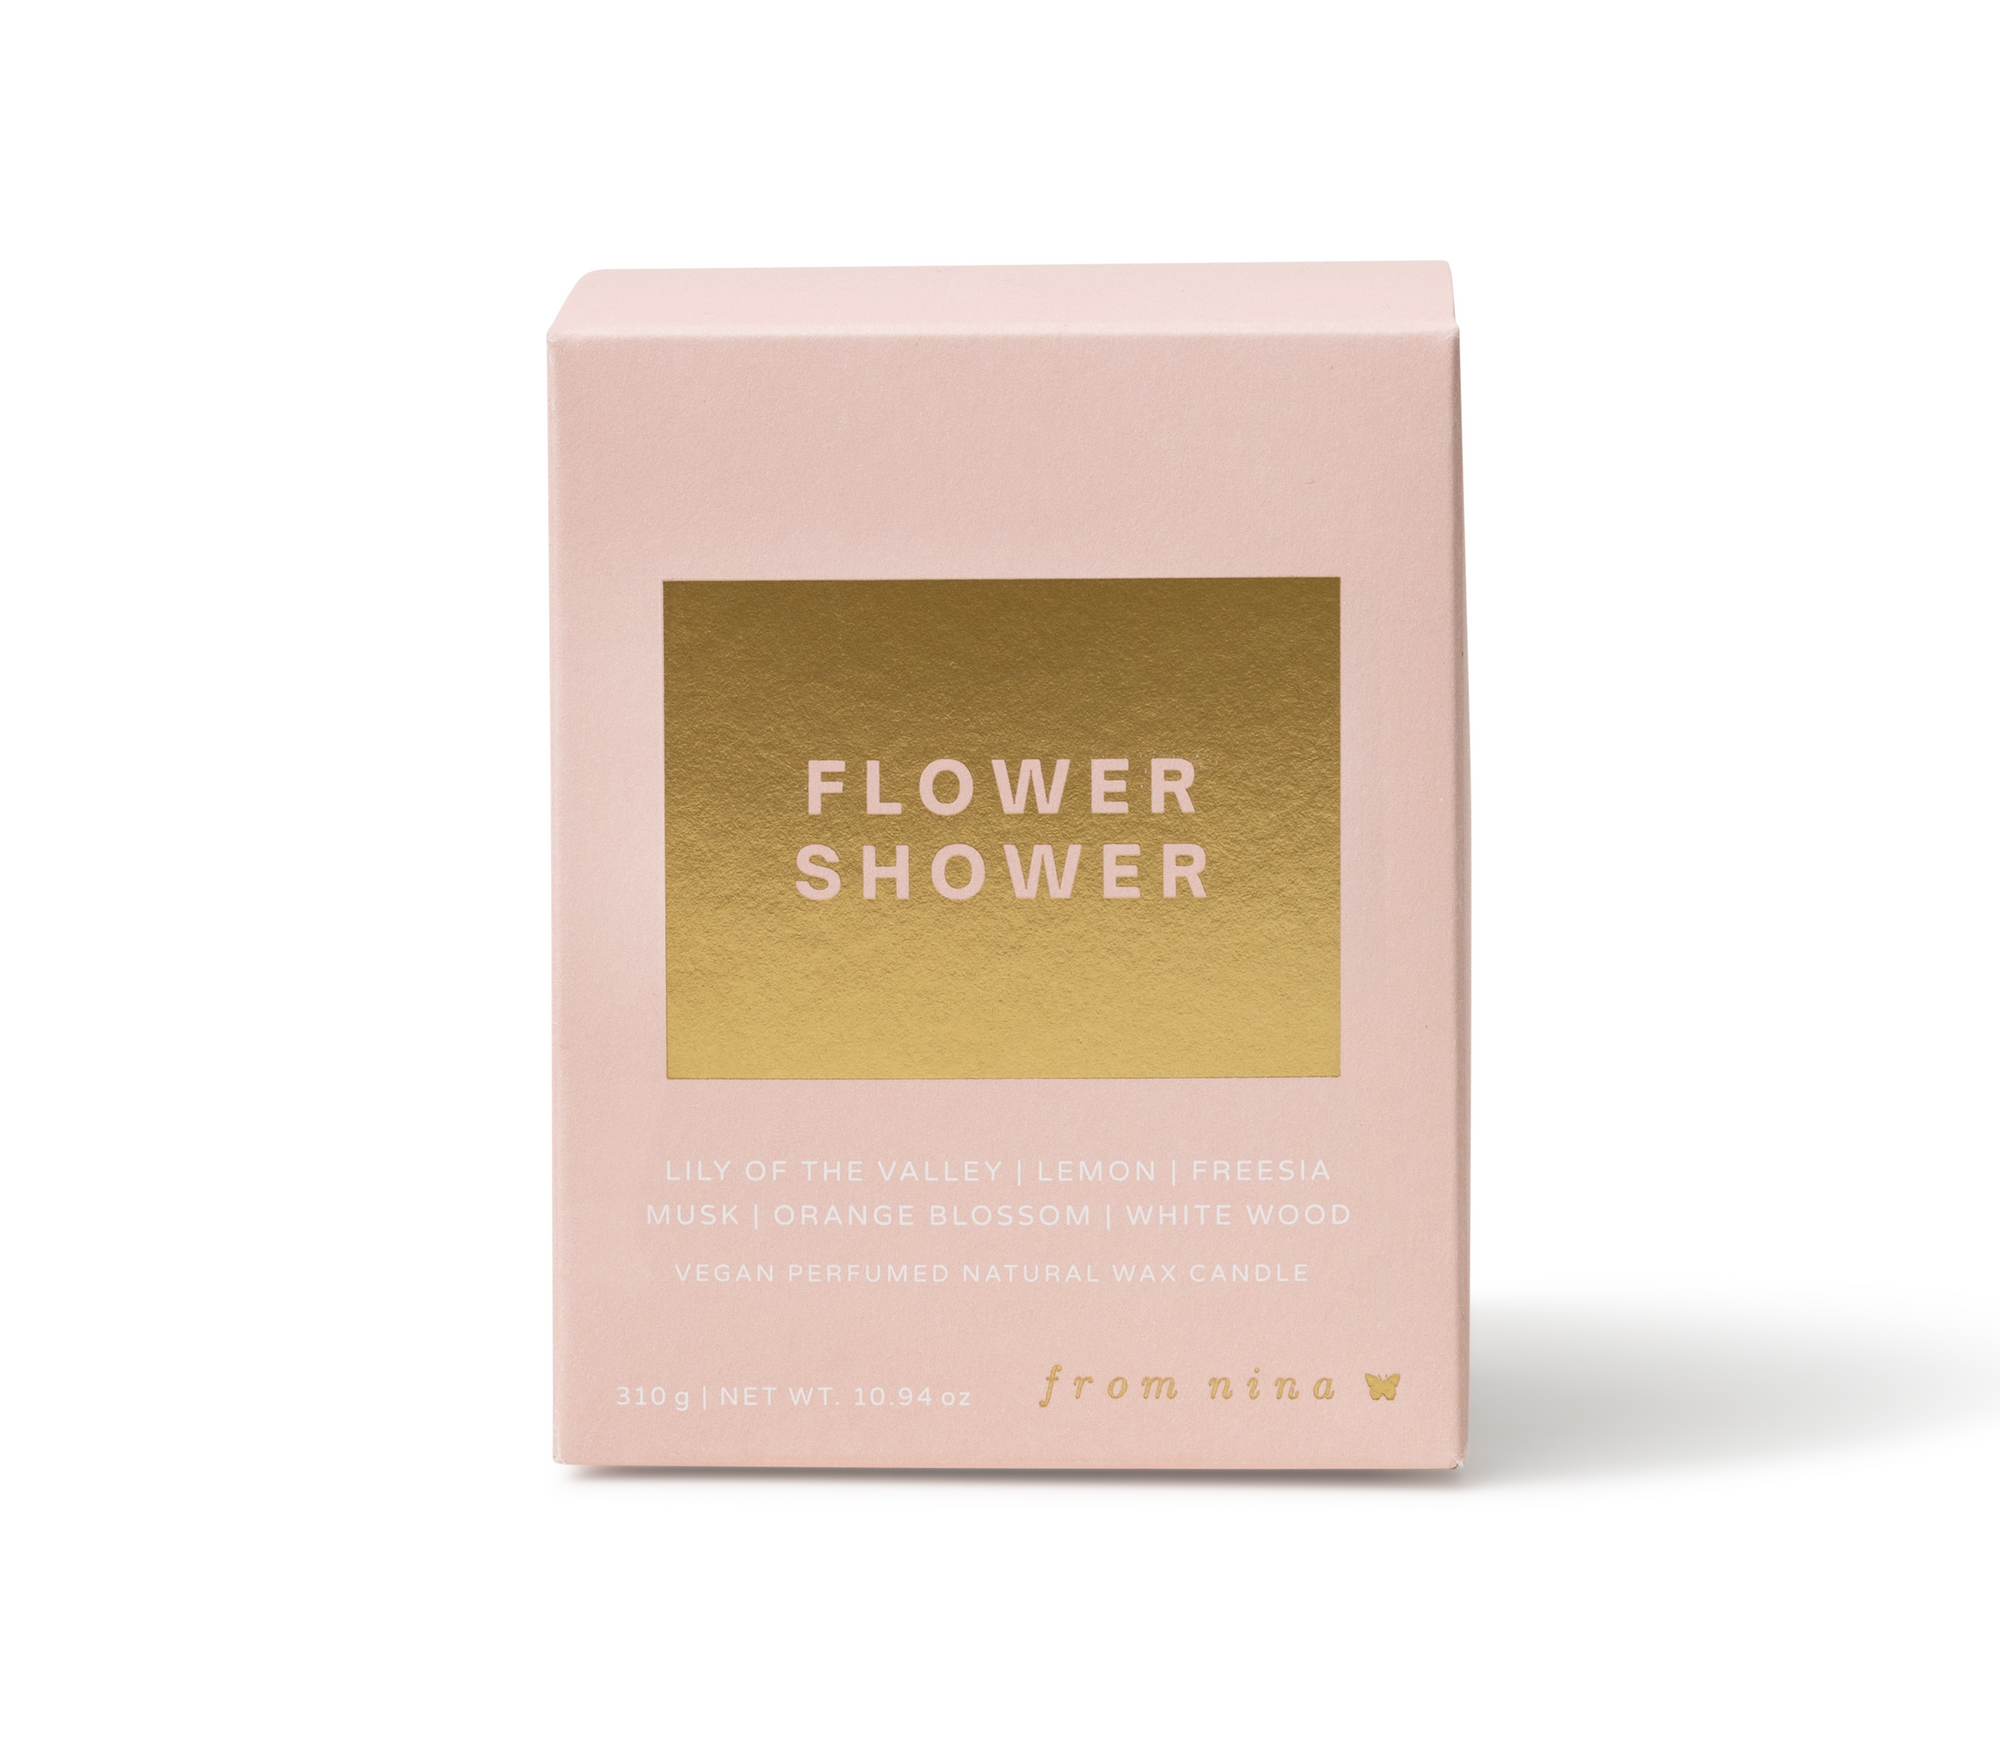 Flower Shower Perfumed Candle